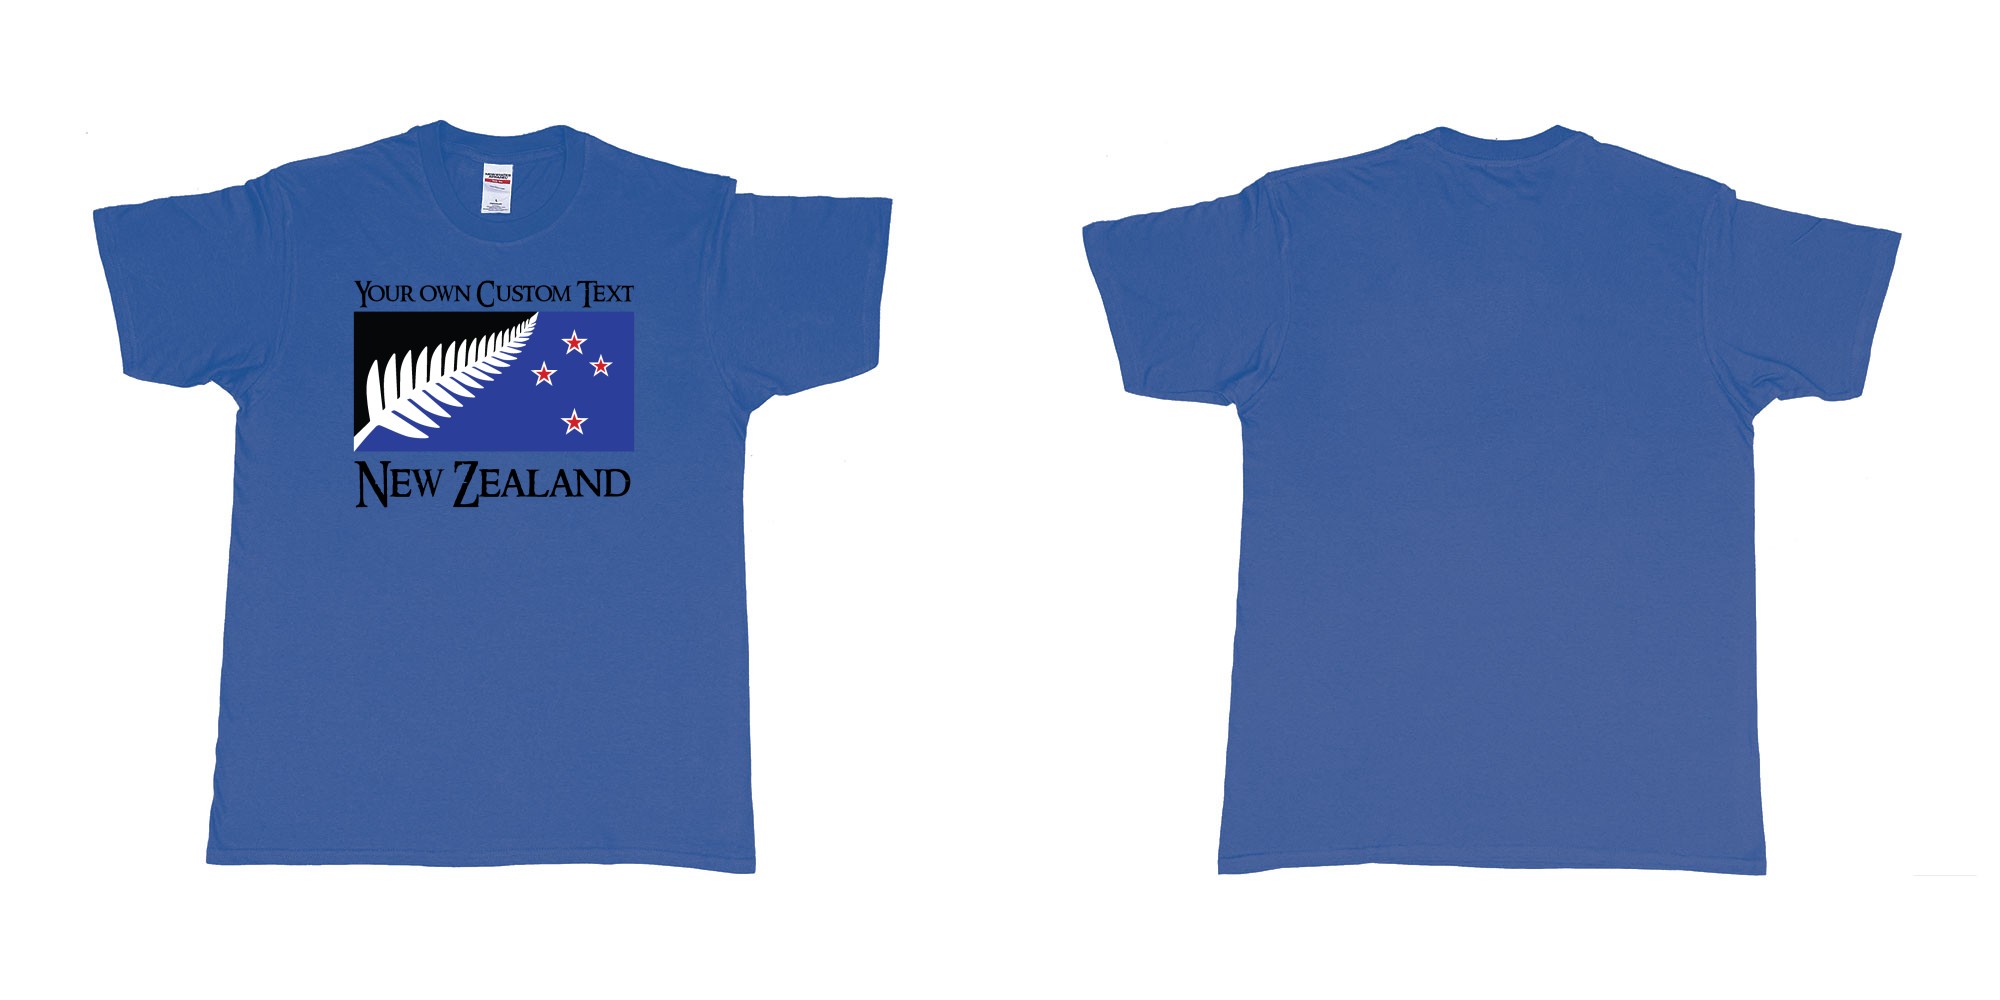 Custom tshirt design new zealand silver fern flag in fabric color royal-blue choice your own text made in Bali by The Pirate Way